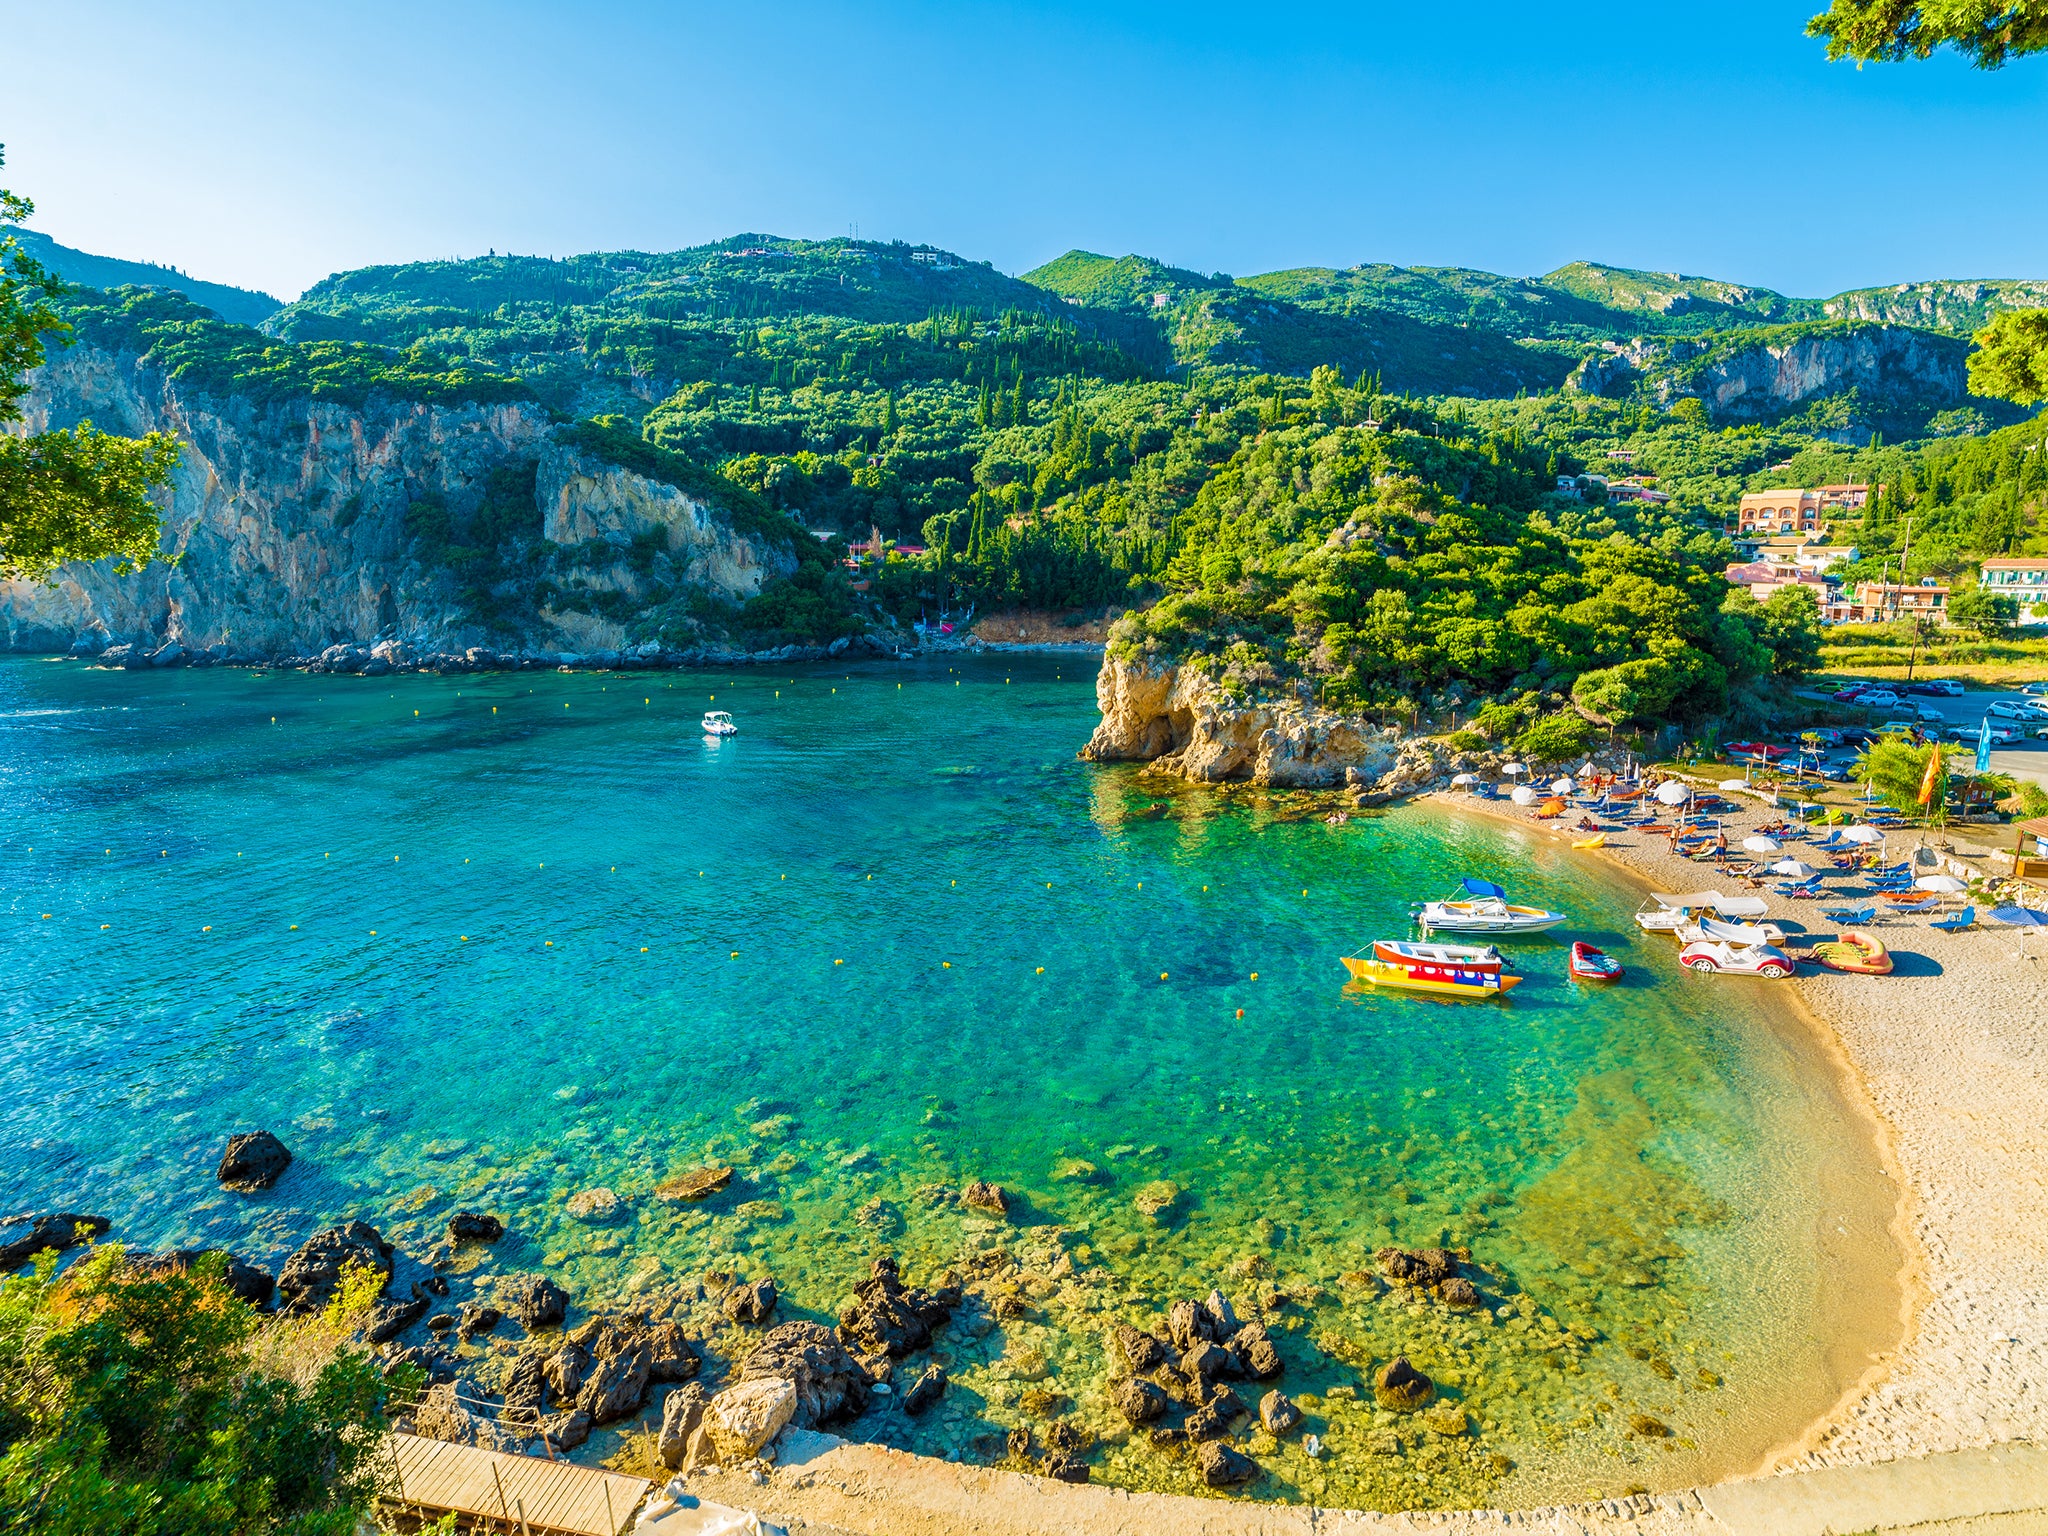 Tourism is important to nations such as Greece – including islands like Corfu